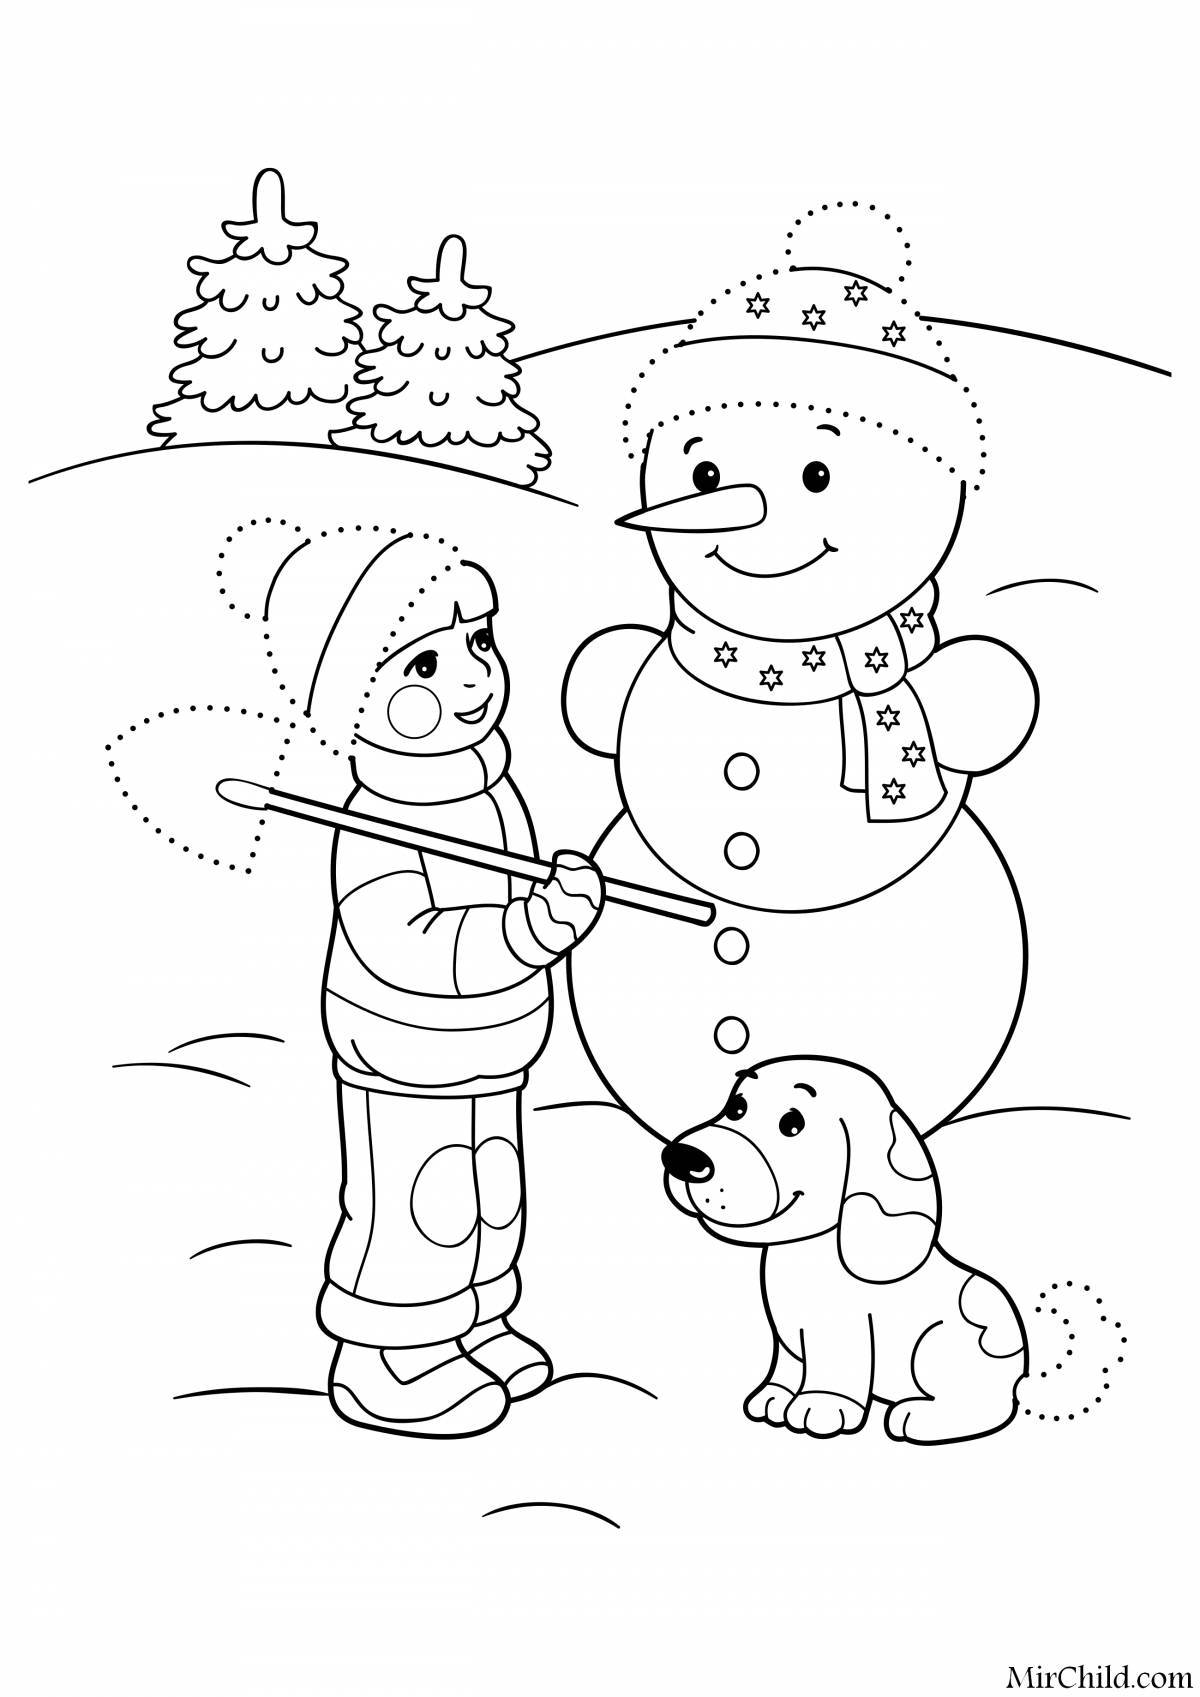 Merry winter coloring book for 3-4 year olds